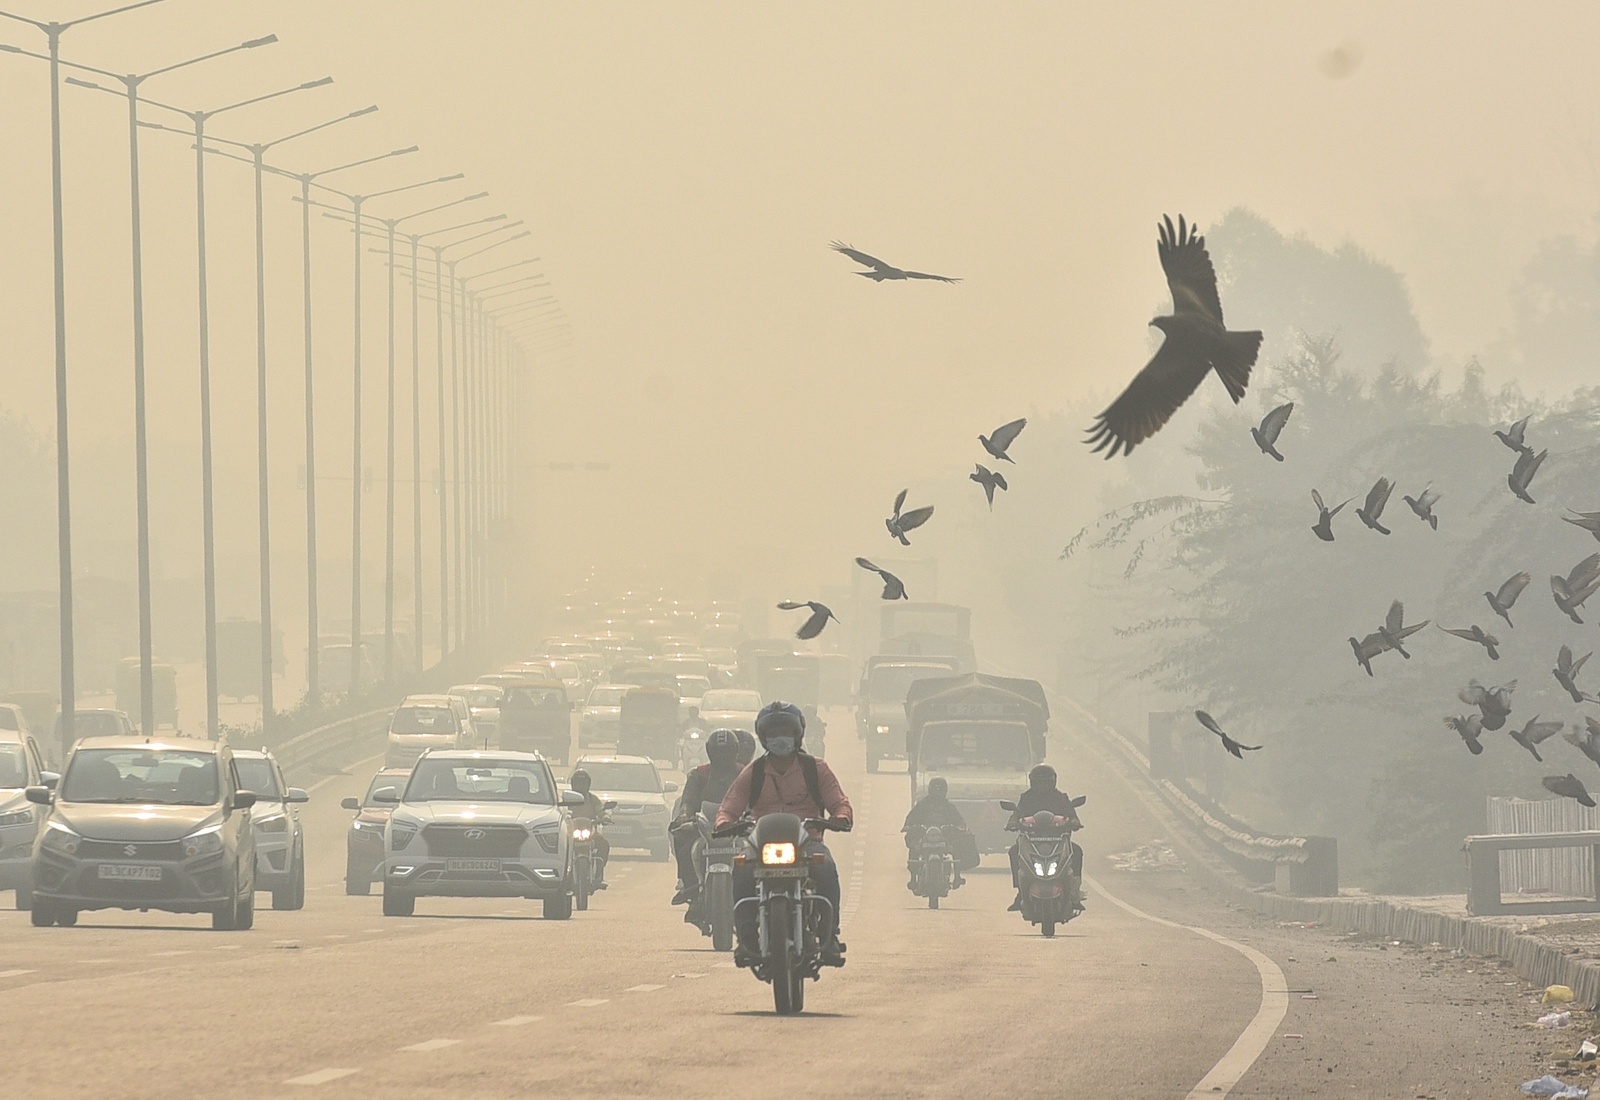 Cars and motorbikes drive through heavy smog, with birds in the foreground amid heavy pollution.